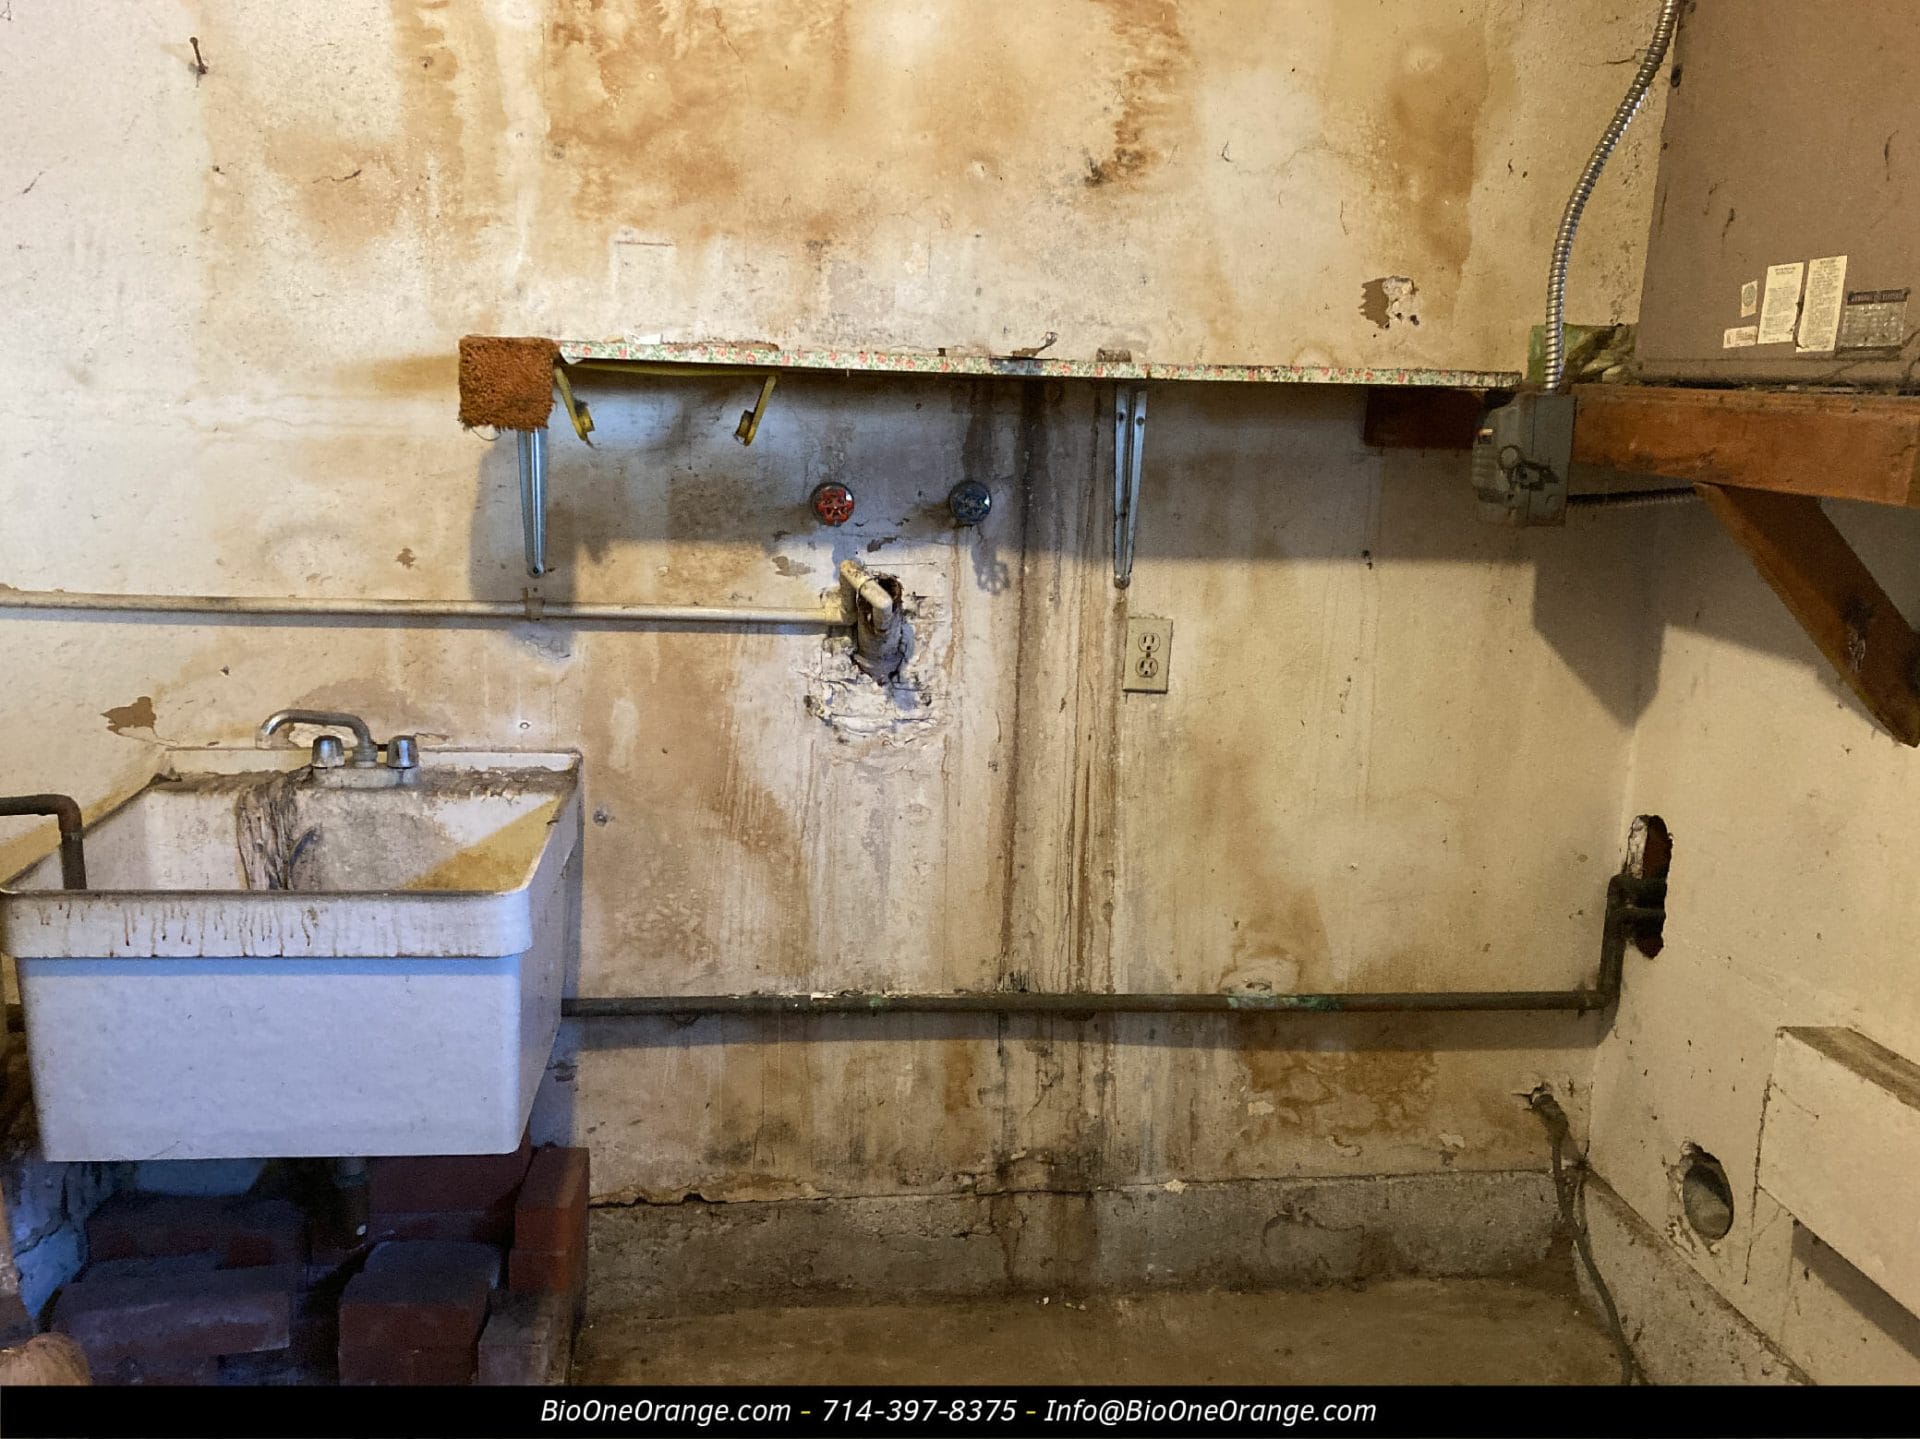 Image shows mold damage in a basement area which was later cleaned by Bio-One restoration technicians.